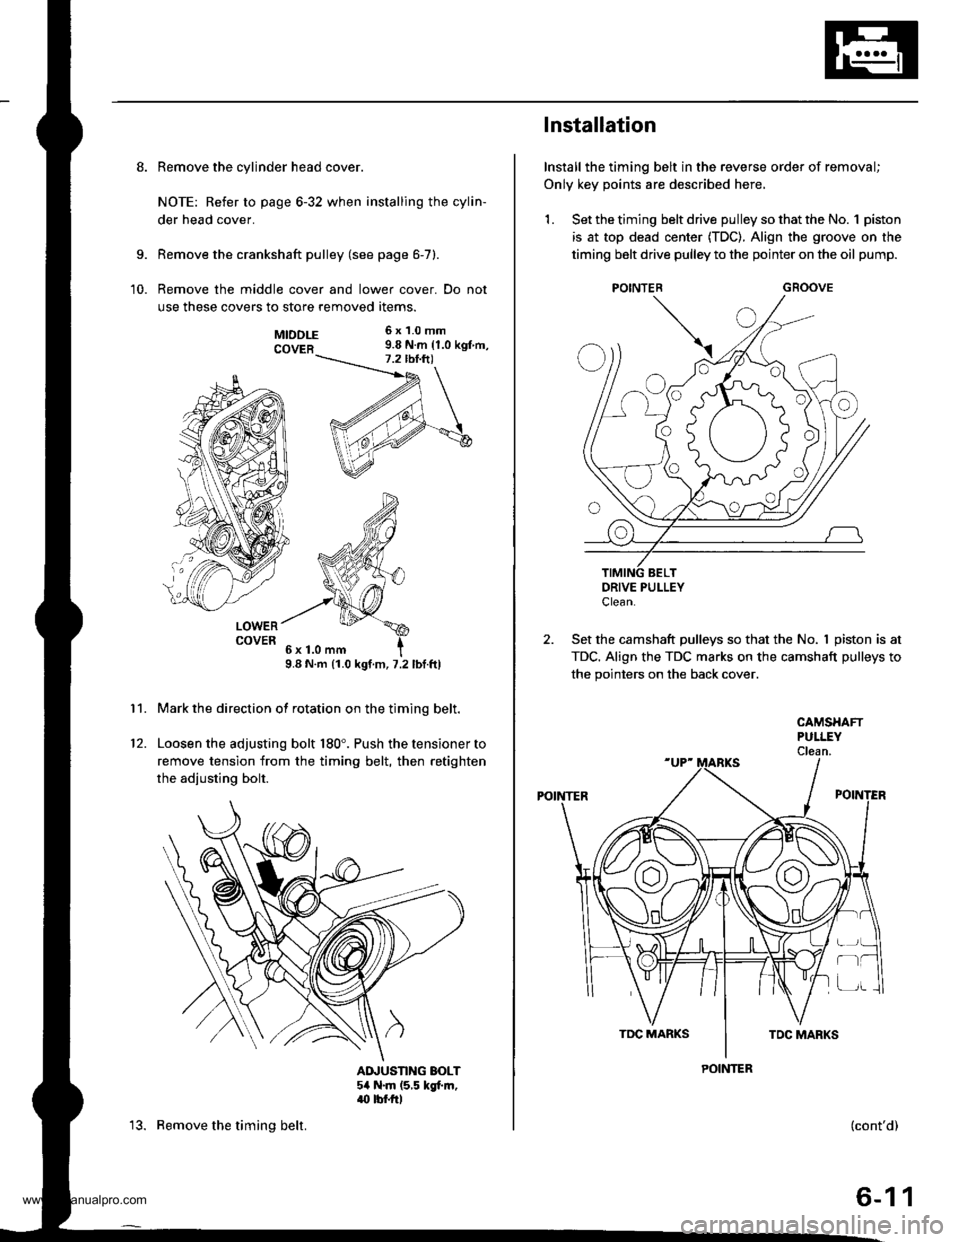 HONDA CR-V 1999 RD1-RD3 / 1.G Workshop Manual 
8. Remove the cylinder head cover.
NOTE: Refer to page 6-32 when installing the cylin-
der head cover.
Remove the crankshaft pulley (see page 6-7).
Remove the middle cover and lower cover. Do not
use